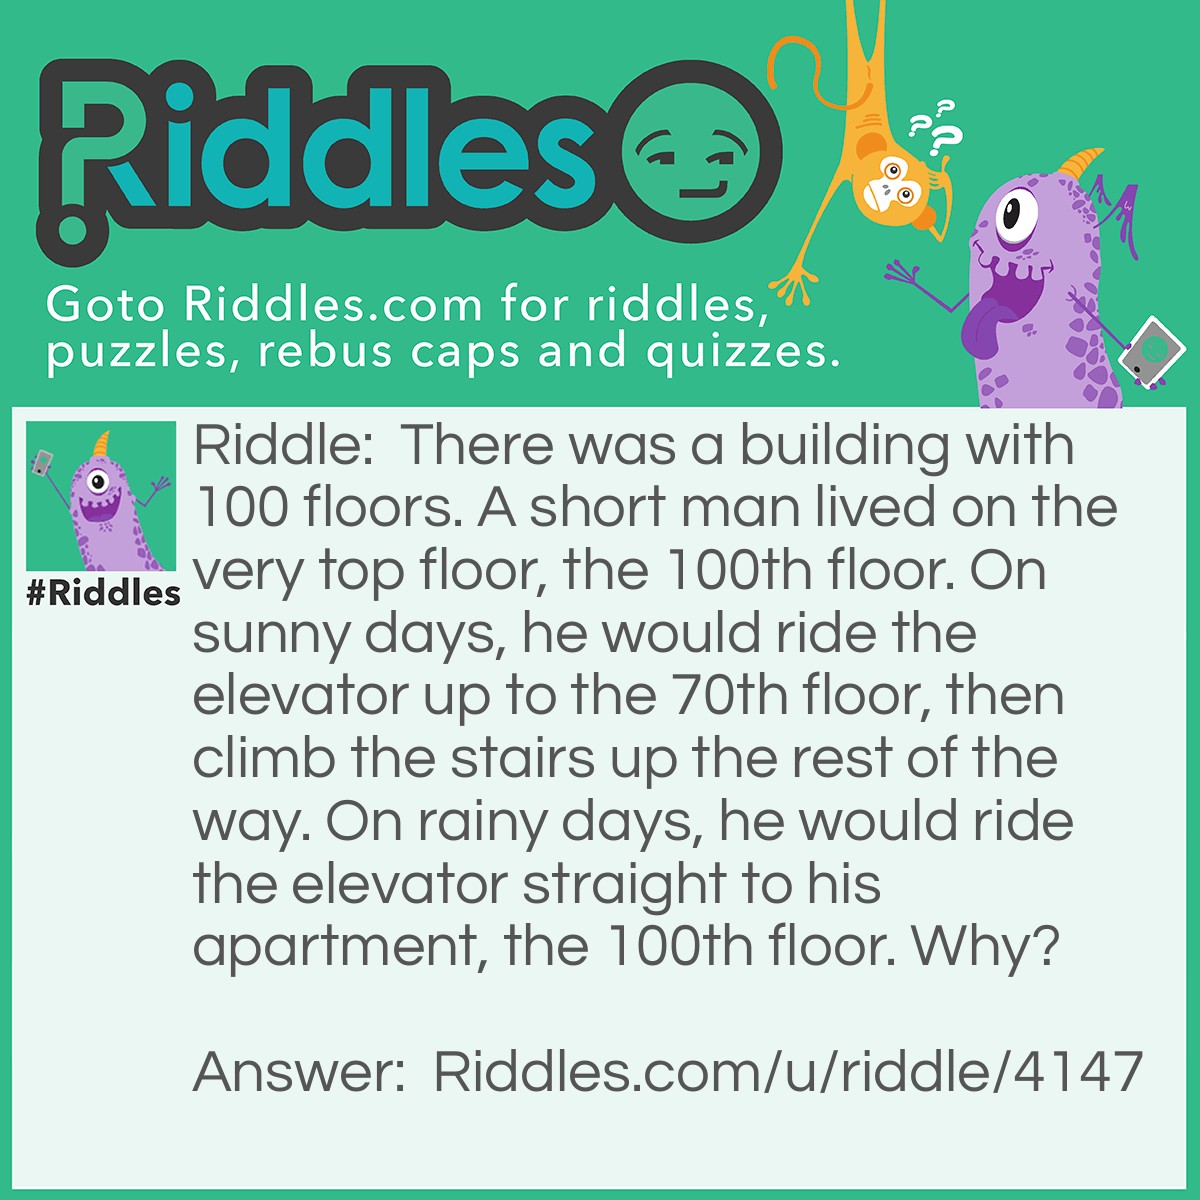 Riddle: There was a building with 100 floors. A short man lived on the very top floor, the 100th floor. On sunny days, he would ride the elevator up to the 70th floor, then climb the stairs up the rest of the way. On rainy days, he would ride the elevator straight to his apartment, the 100th floor. Why? Answer: He is short, so he can't reach the 100th floor button. On rainy days, he can use his umbrella to poke the button.